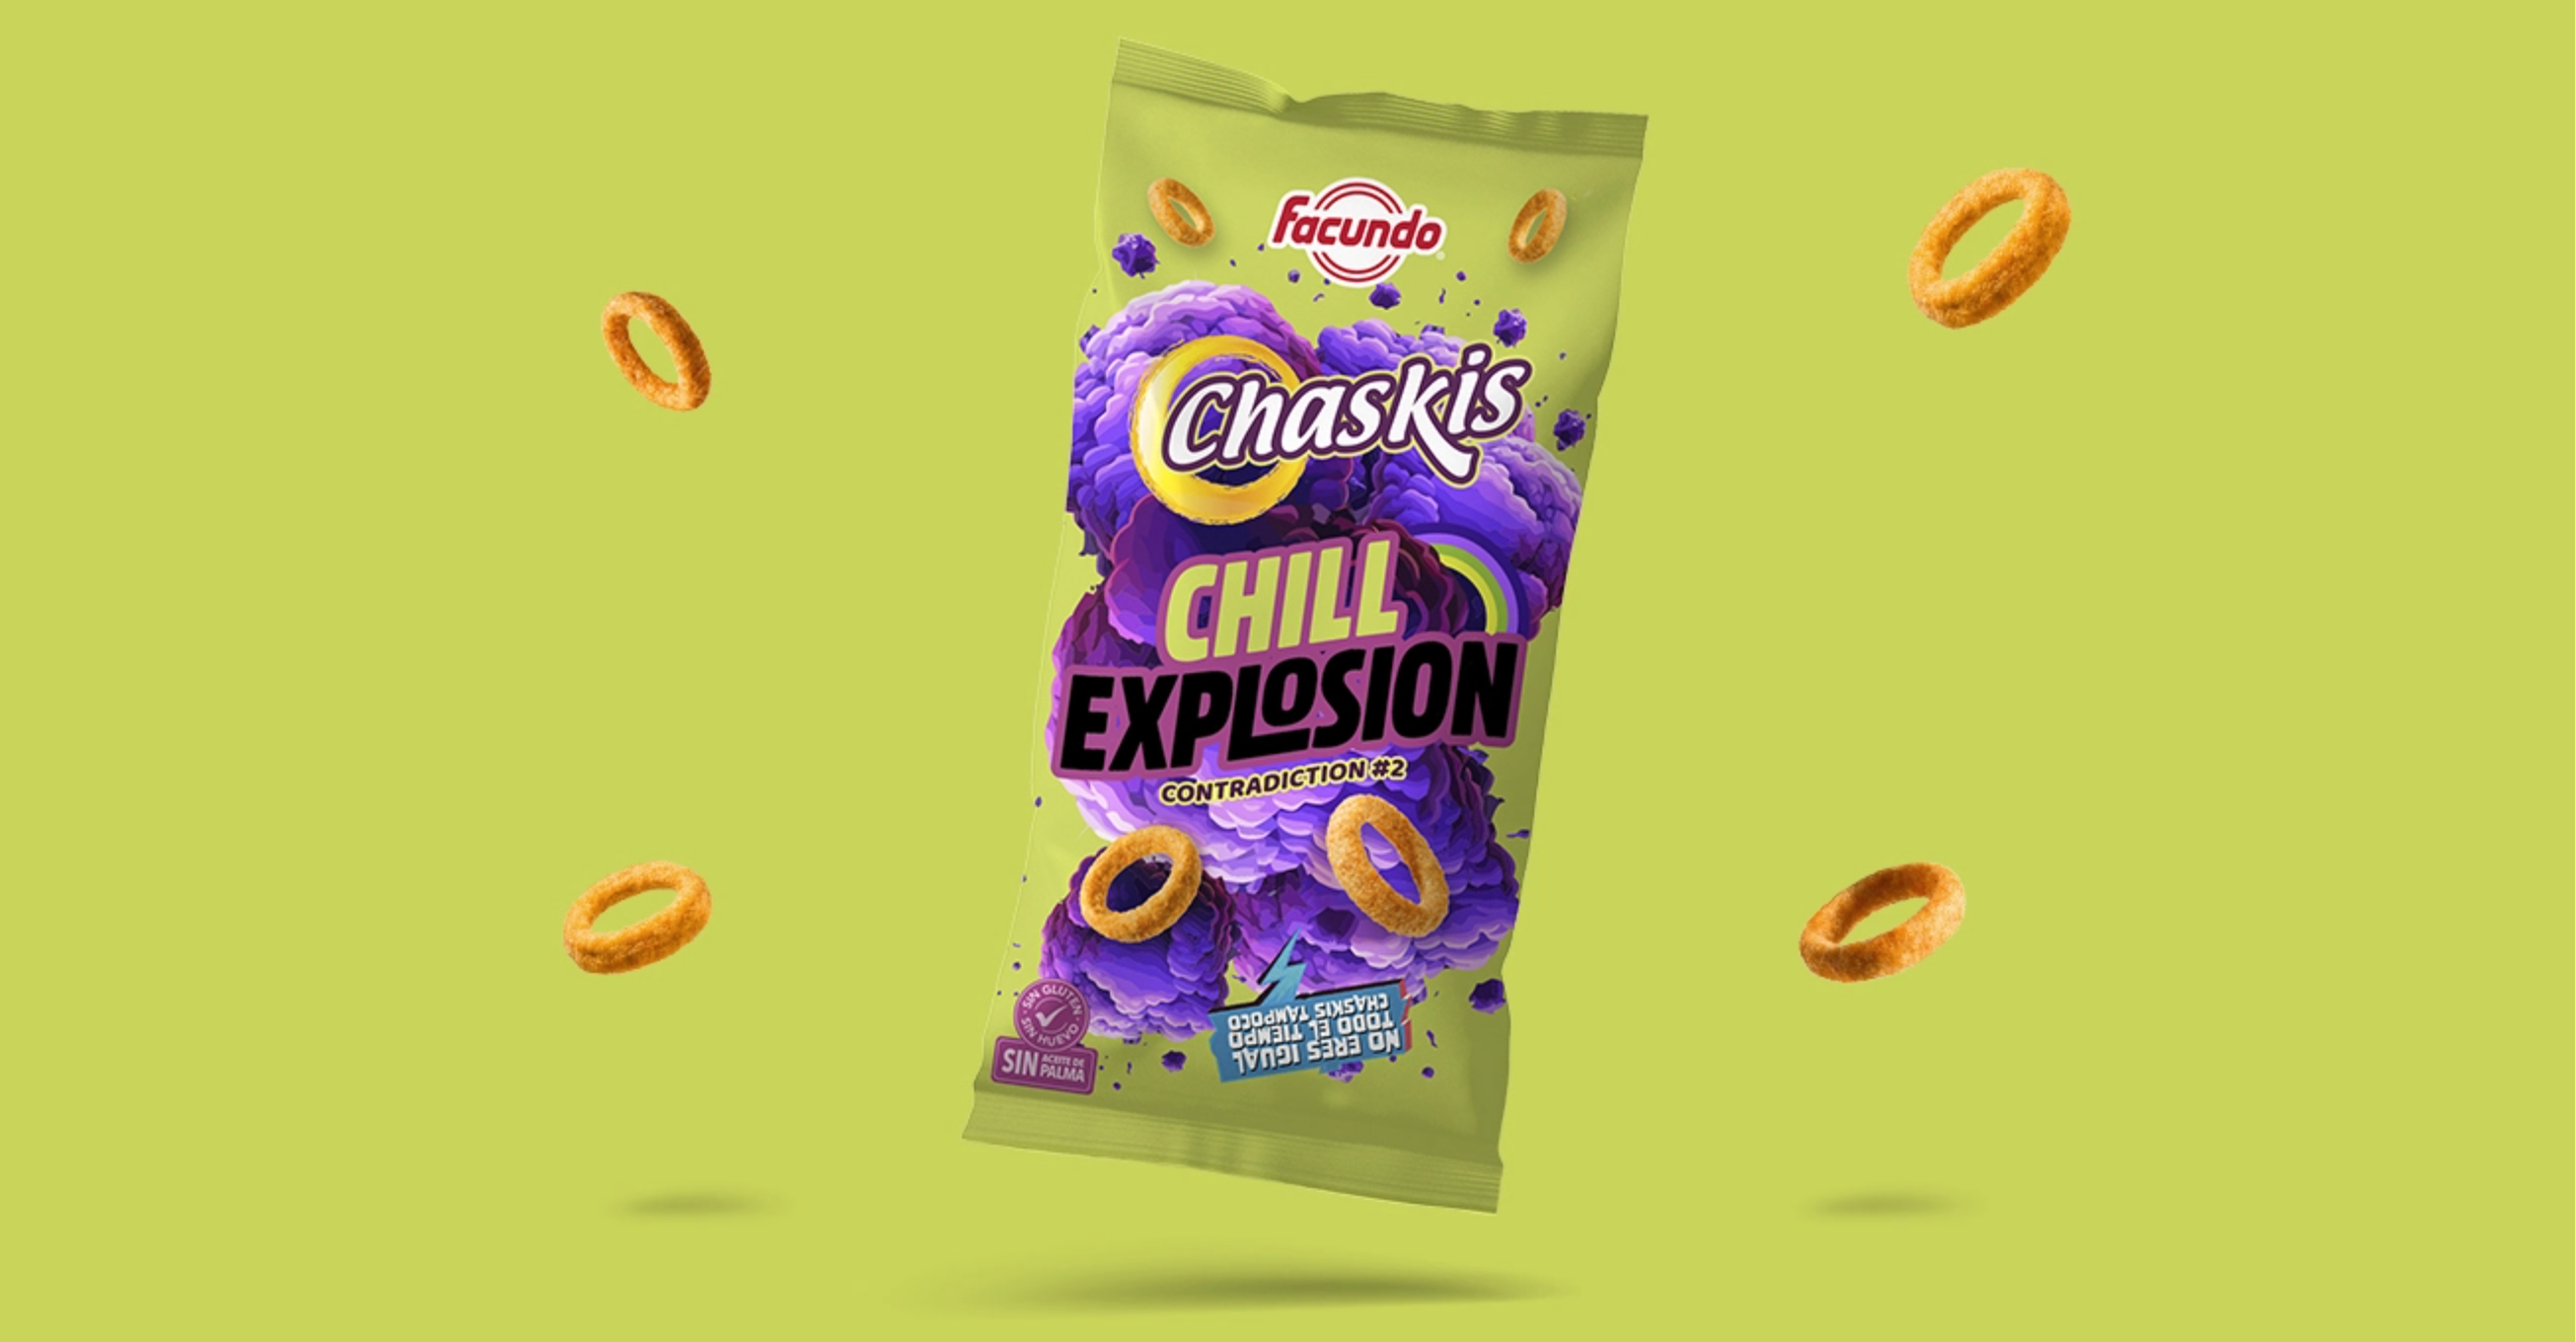 CHASKIS - CHILL EXPLOSION